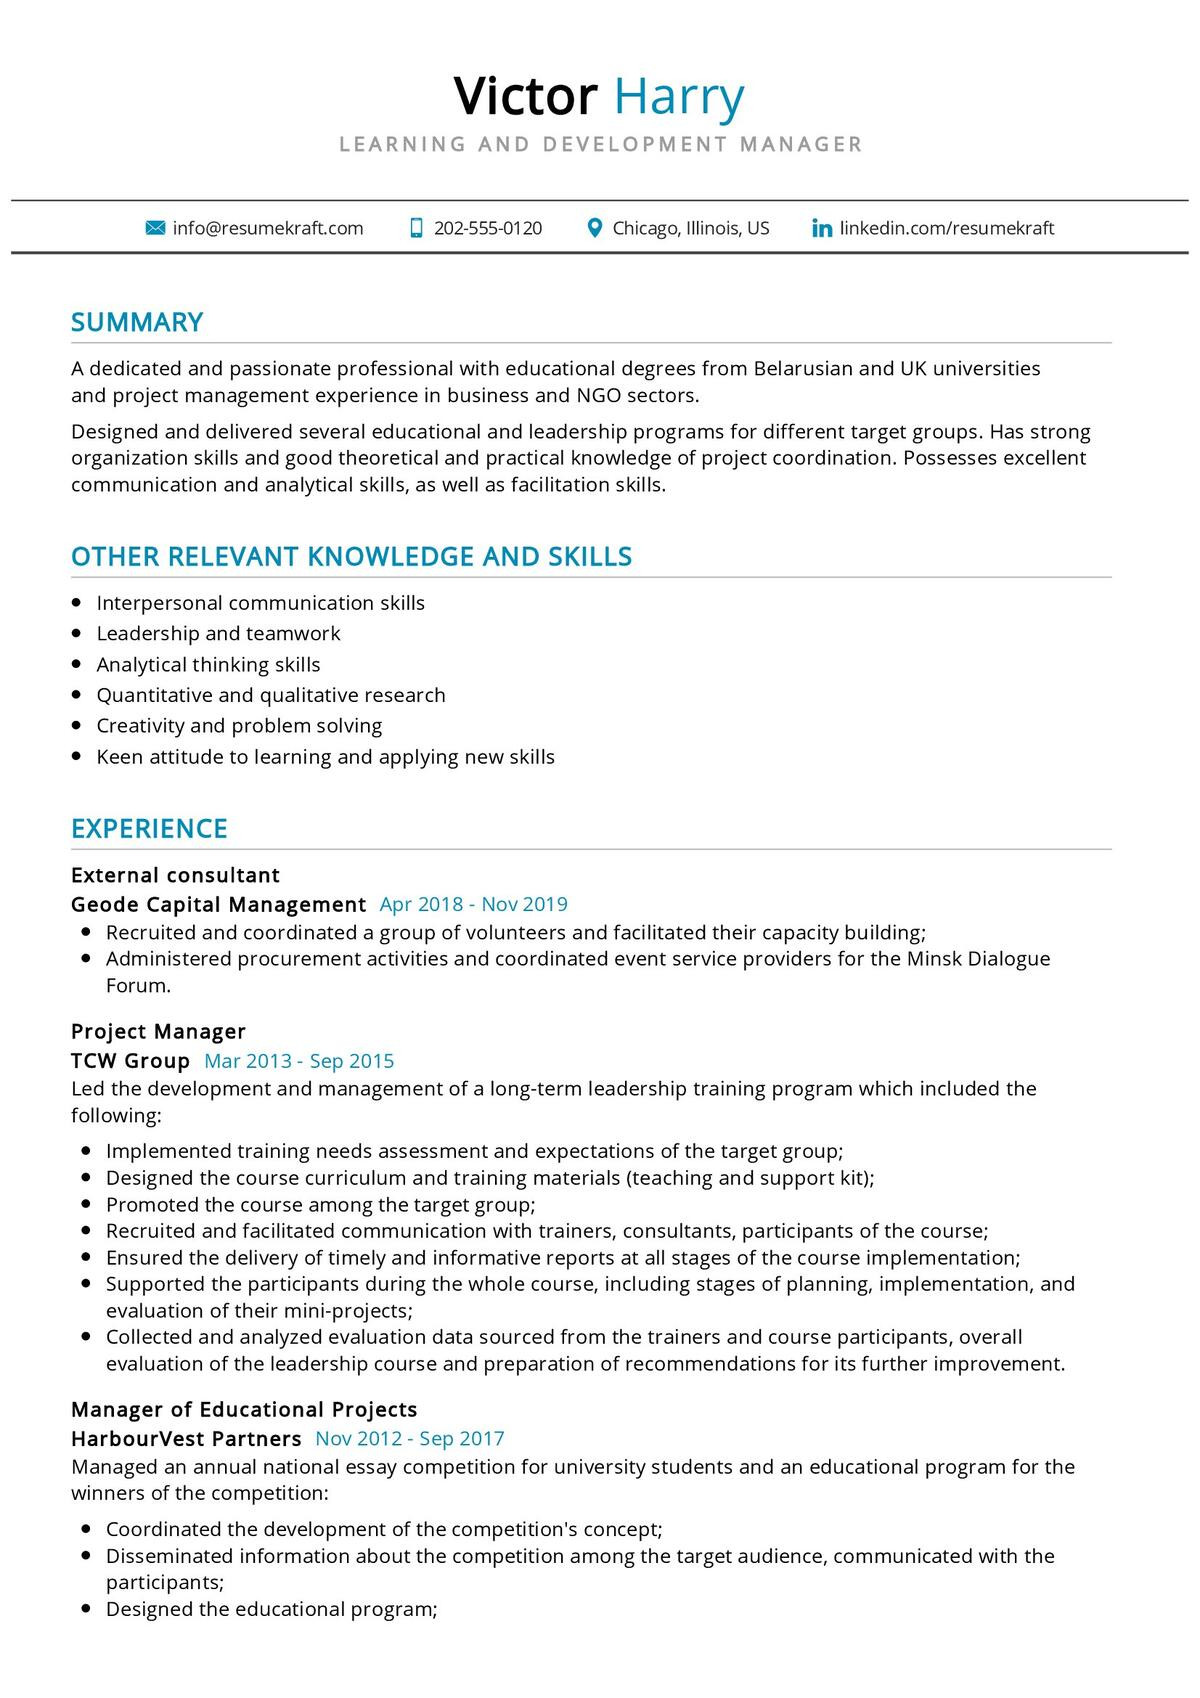 Learning and Development Director Resume Sample Learning and Development Manager Resume 2021 Writing Guide …